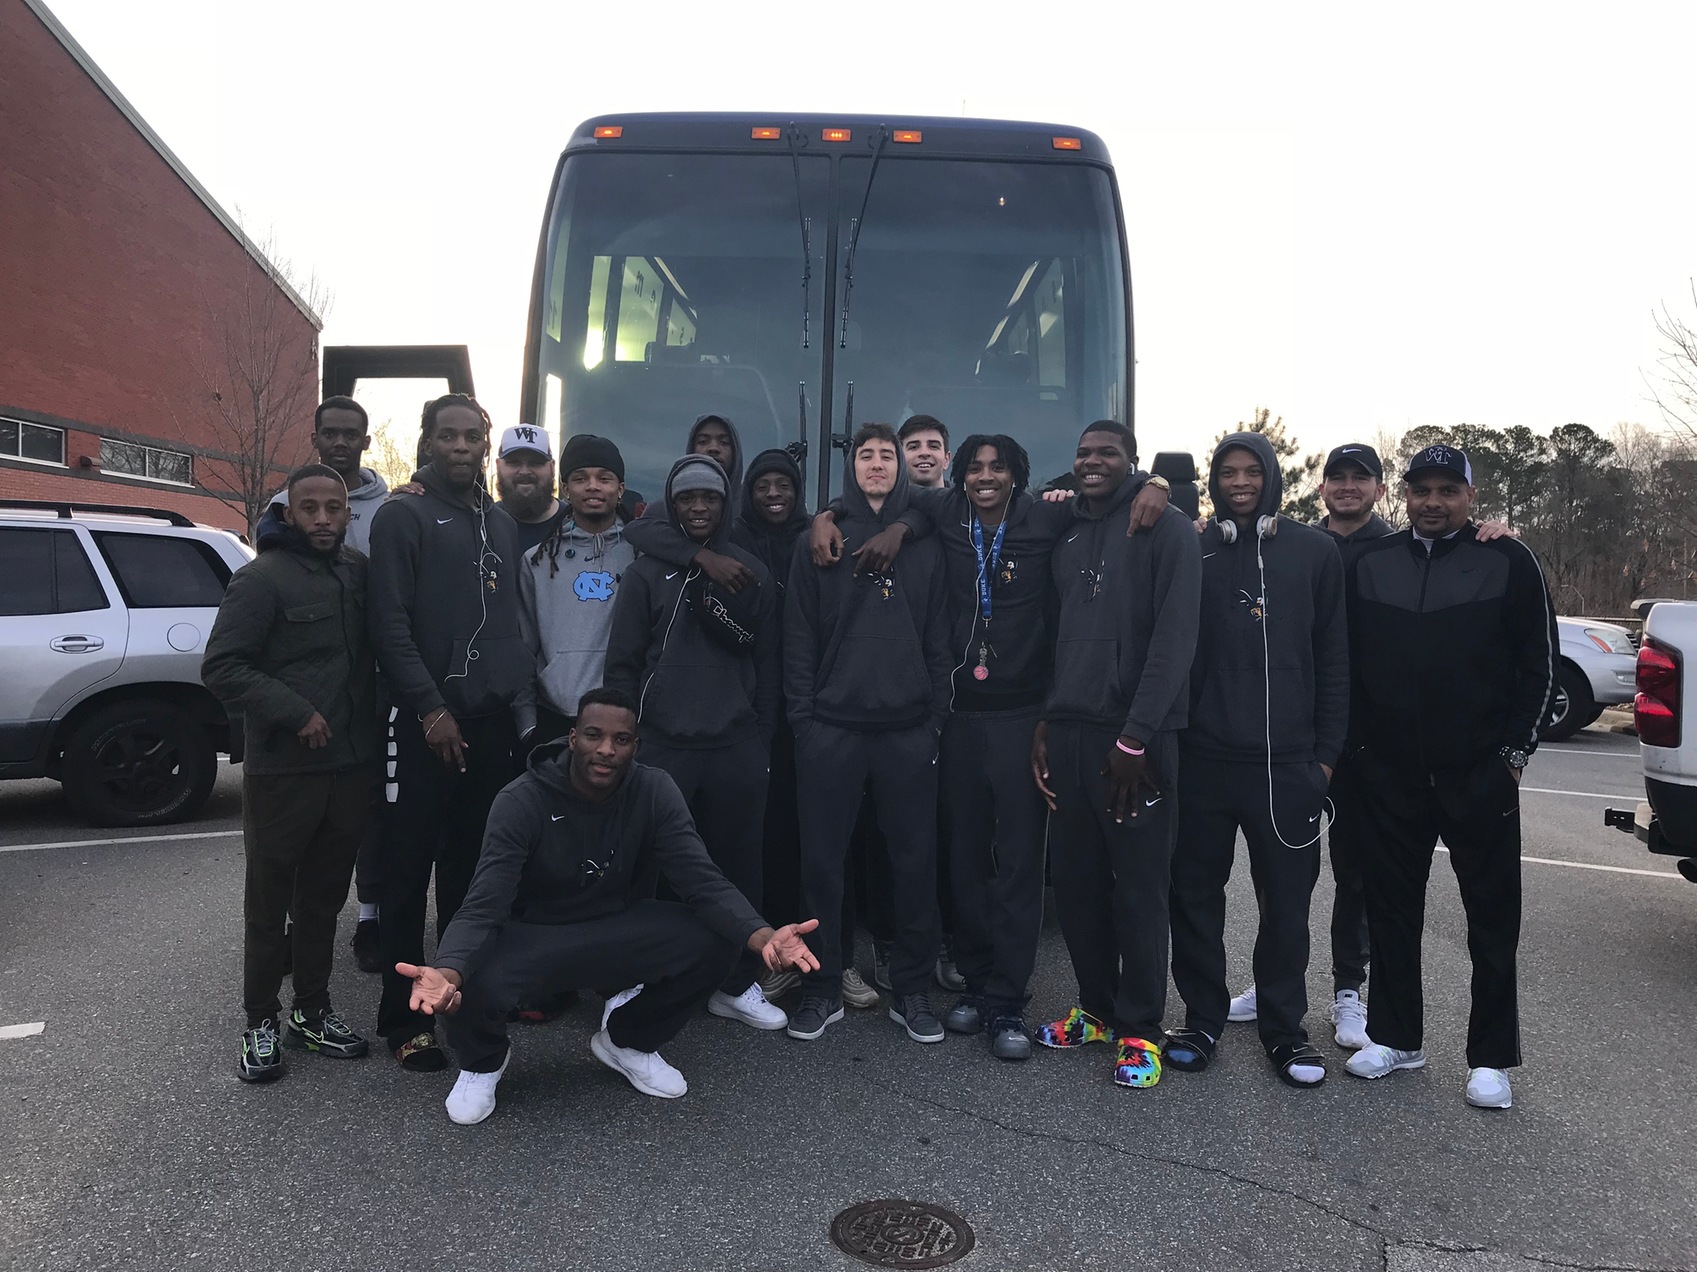 Sunday morning came early for Wake Tech men's basketball- the team boarded a bus at 8:00 am to begin their journey to Danville, IL.